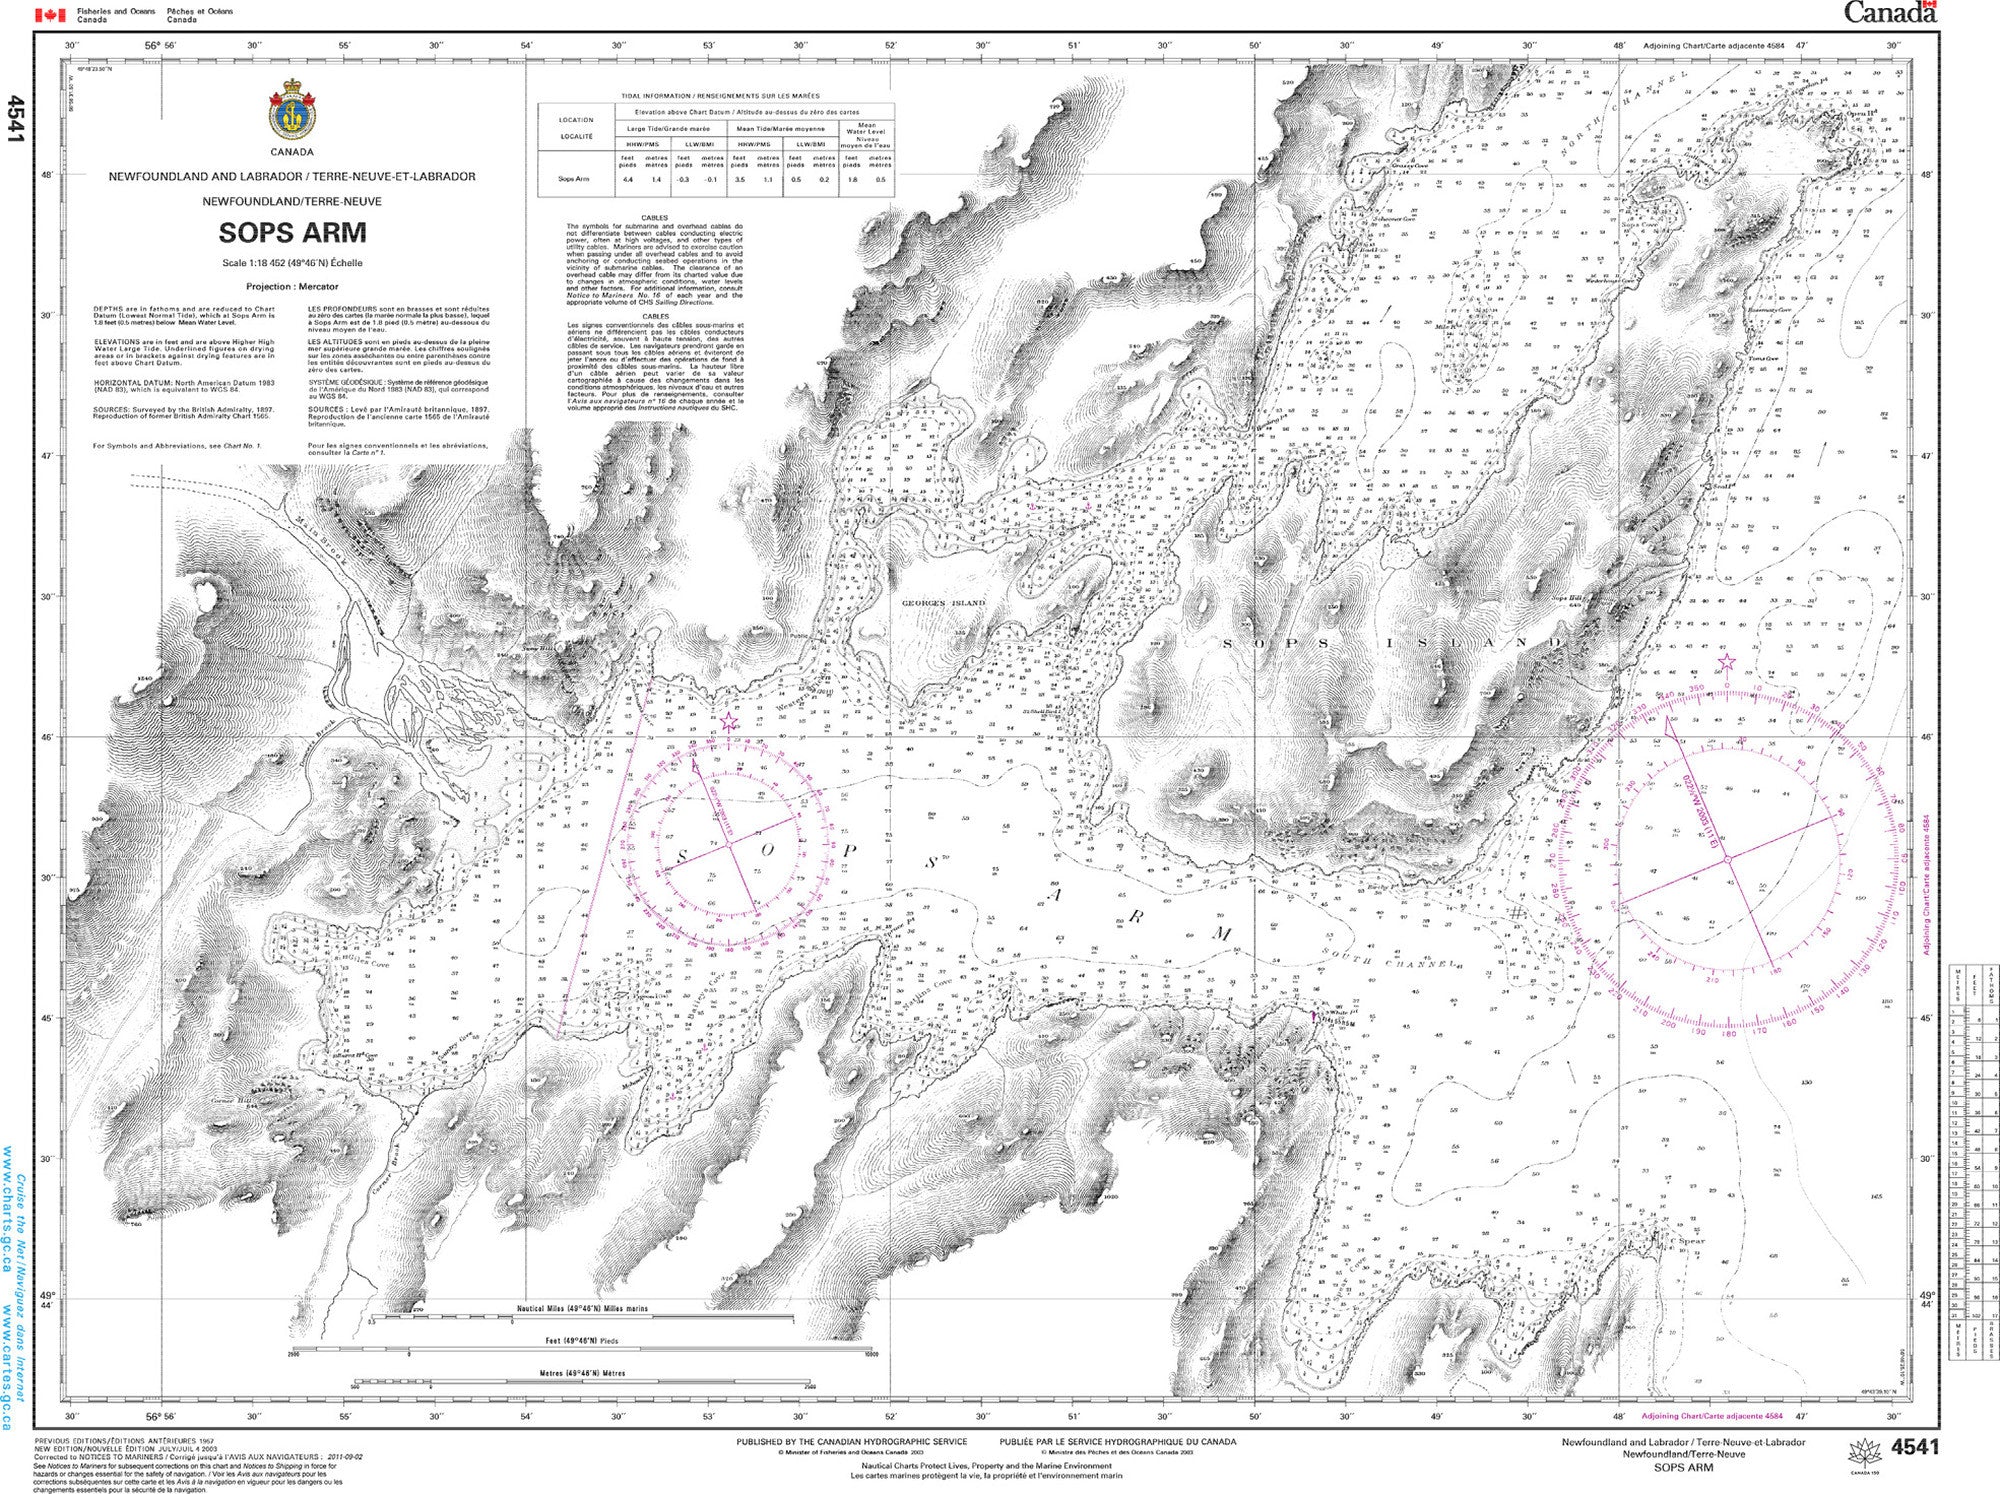 Canadian Hydrographic Service Nautical Chart CHS4541: Sops Arm